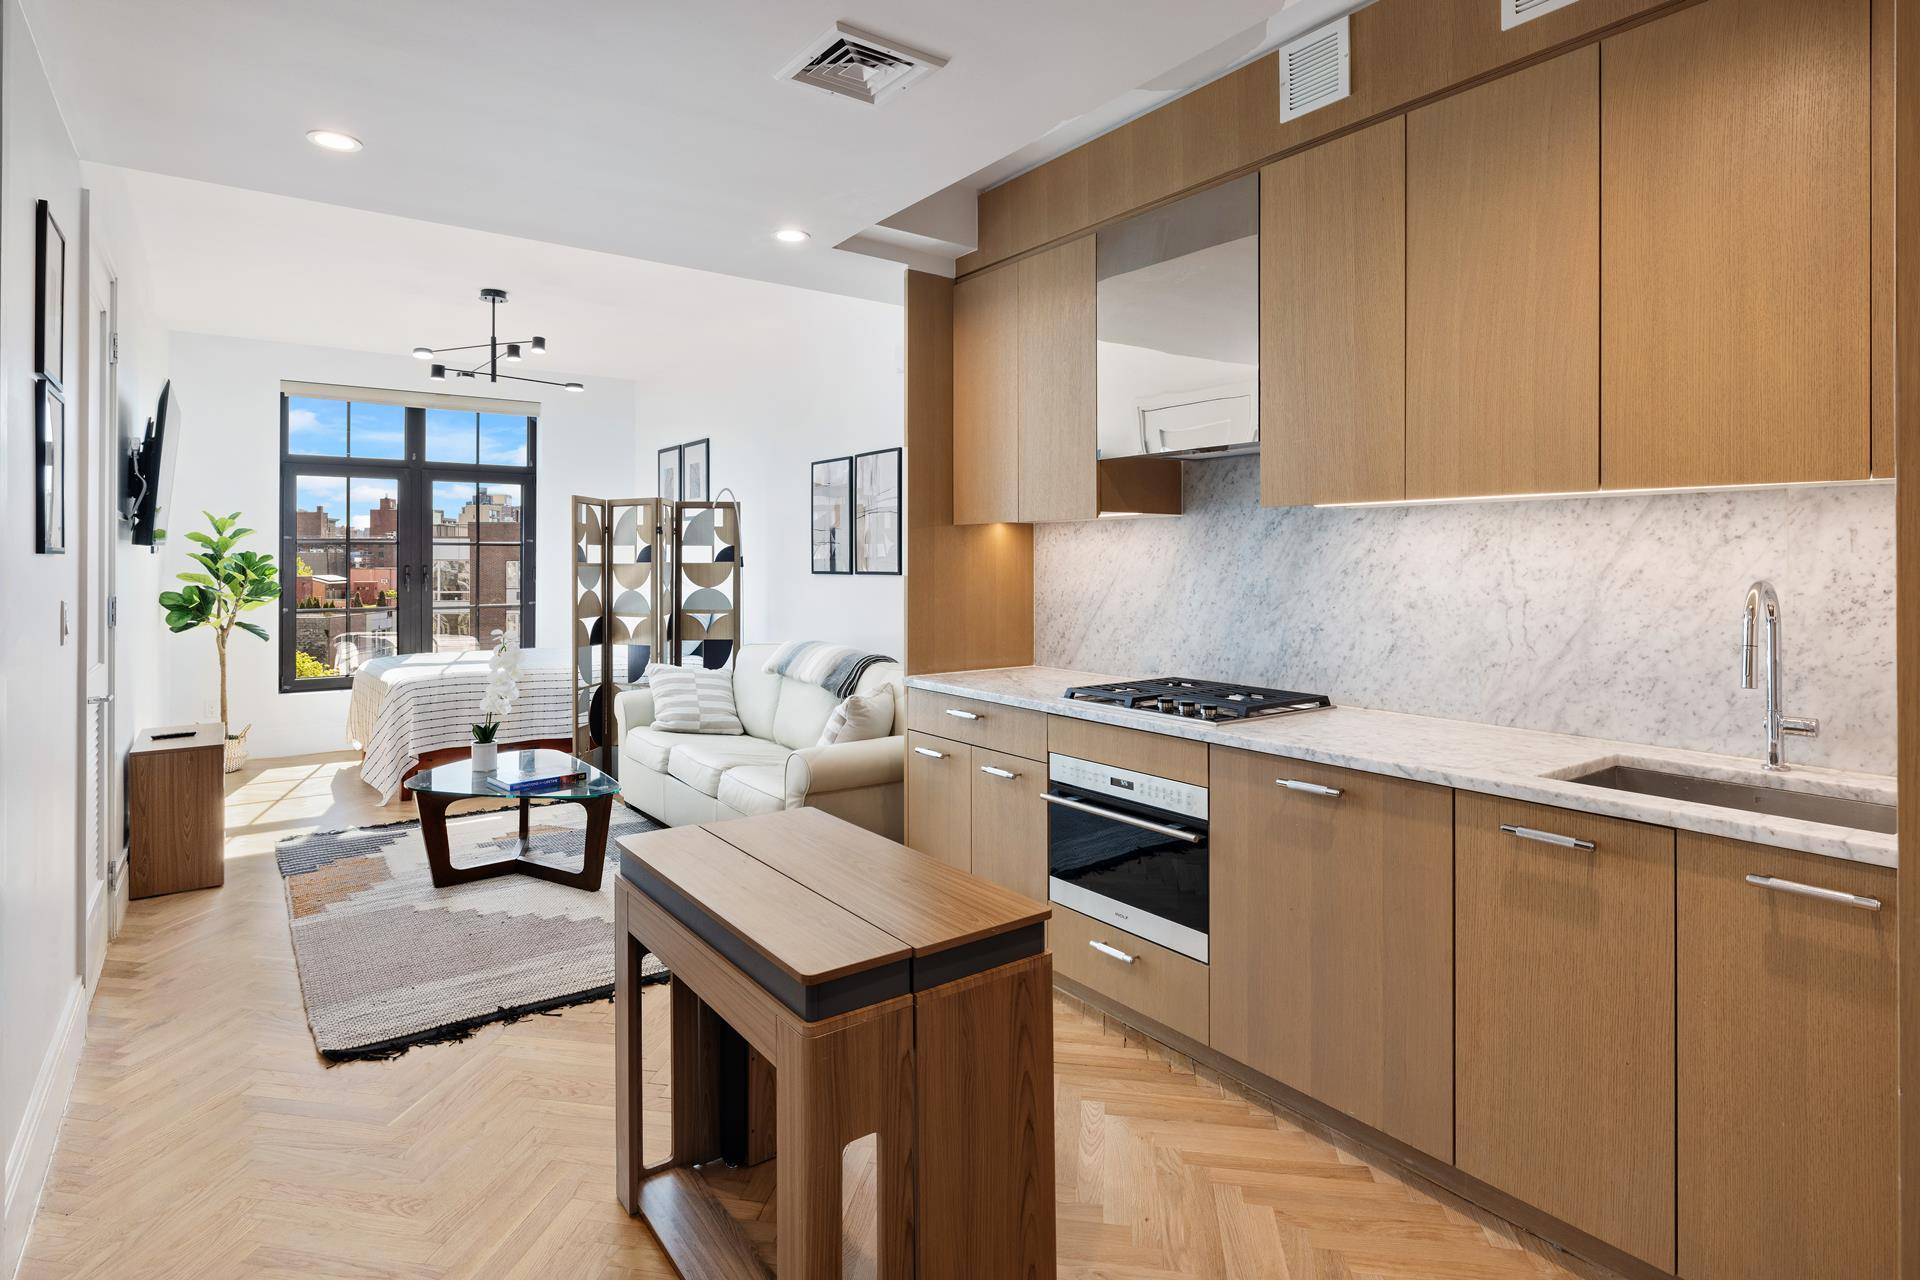 Fully furnished rental ! There are zero amenity fees at this luxury condominium.